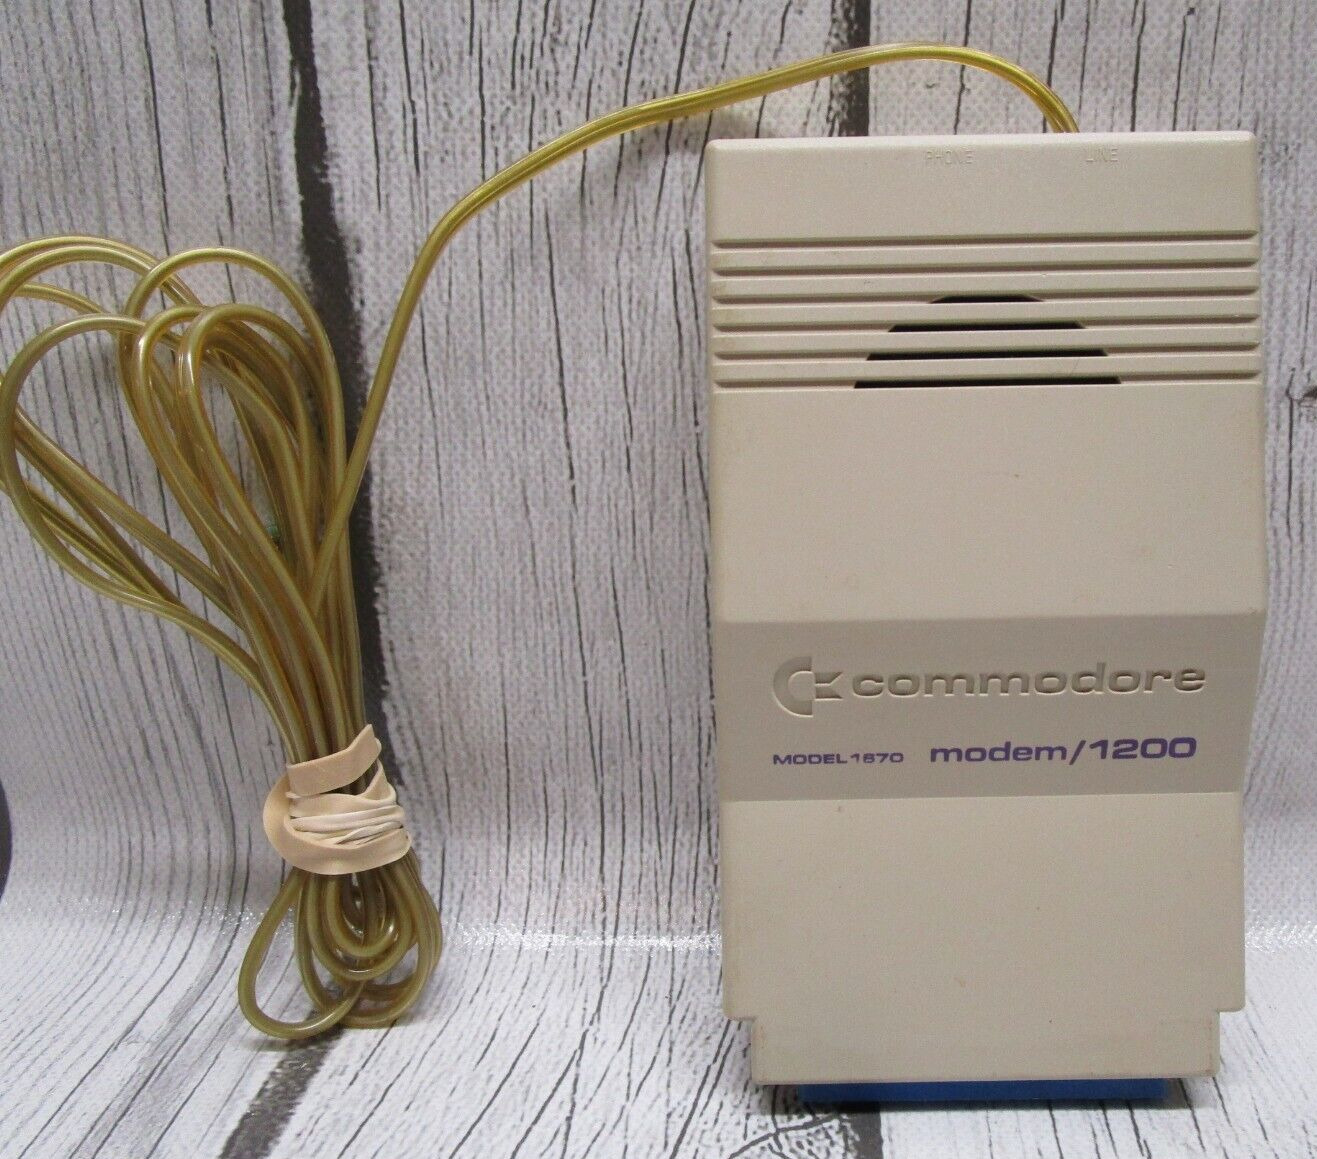 Vintage Commodore Modem 1200 Model 1670 For Commodore 64 / 128 Untested